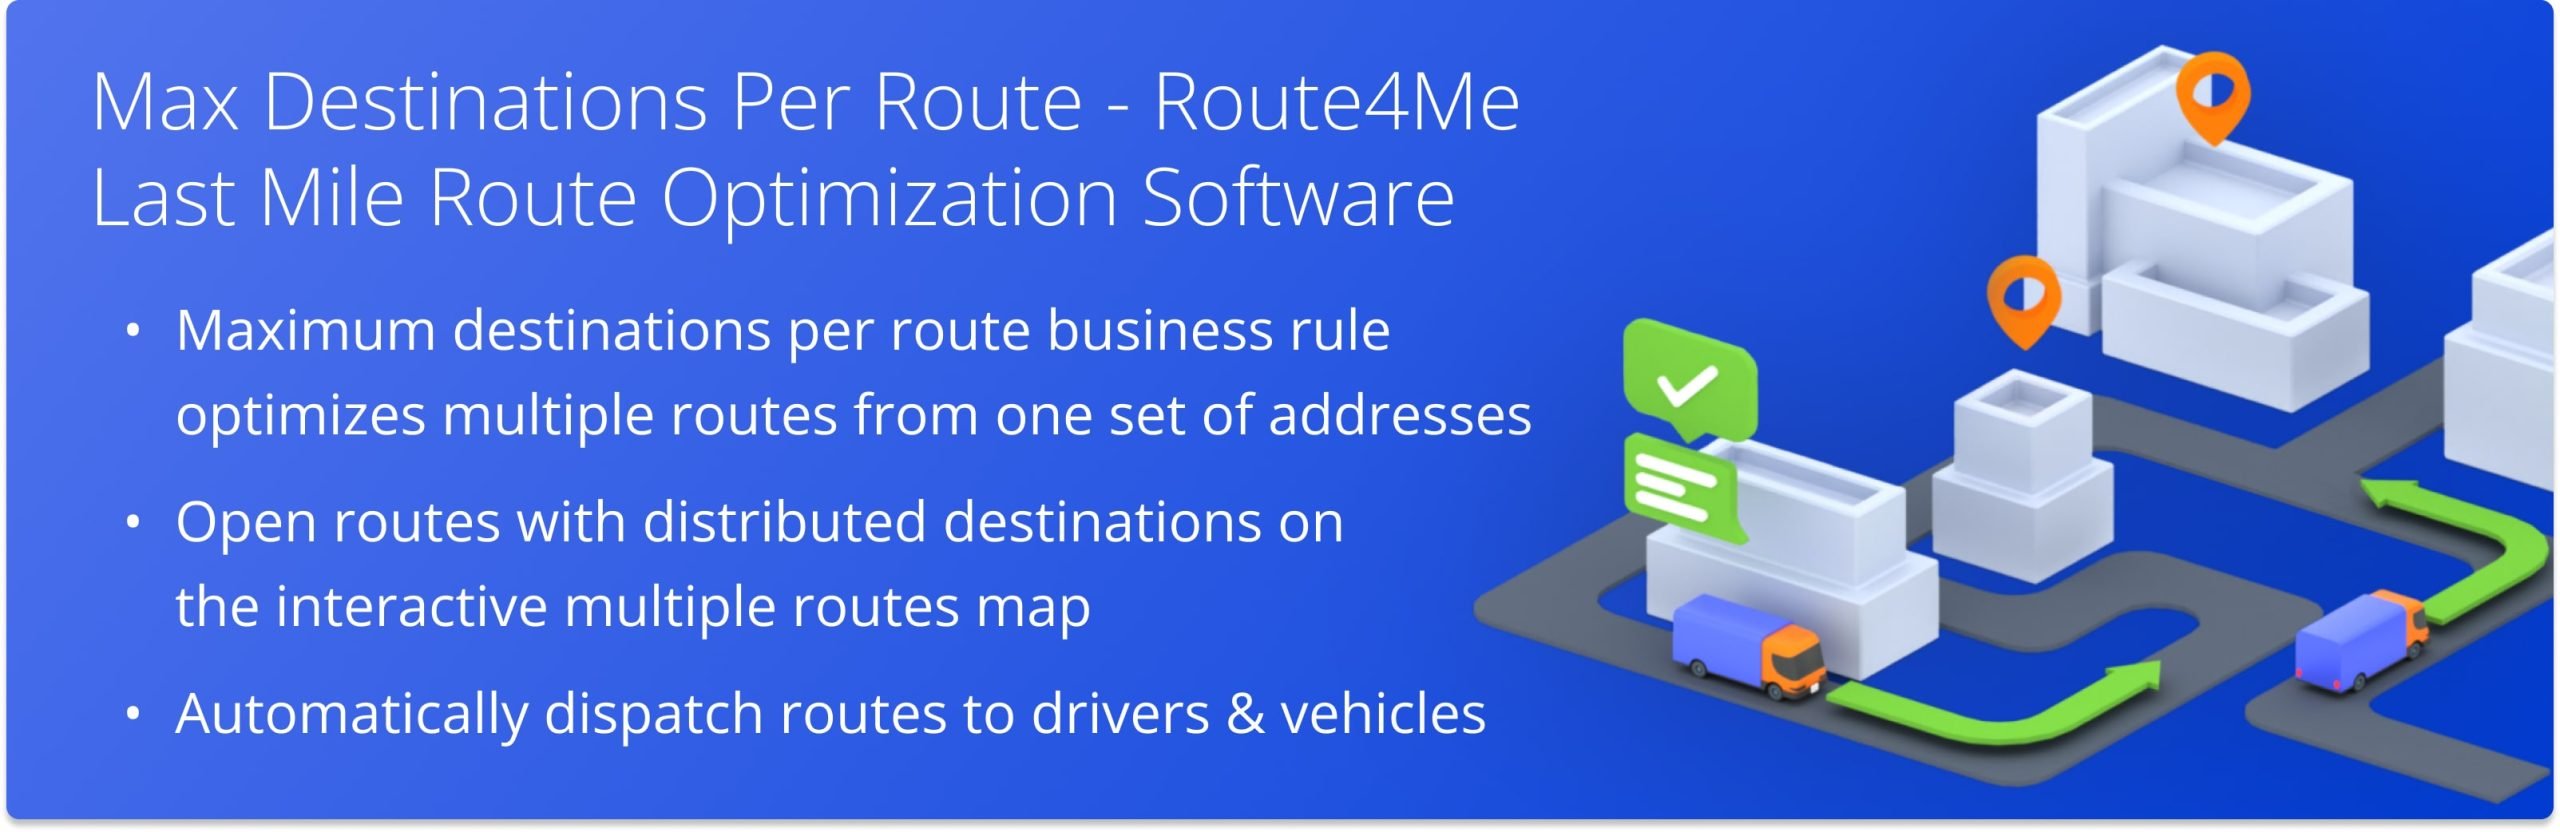 Plan multiple routes with limited max destinations from a single set of addresses automatically with Route4Me's Max Destinations Business Rule.